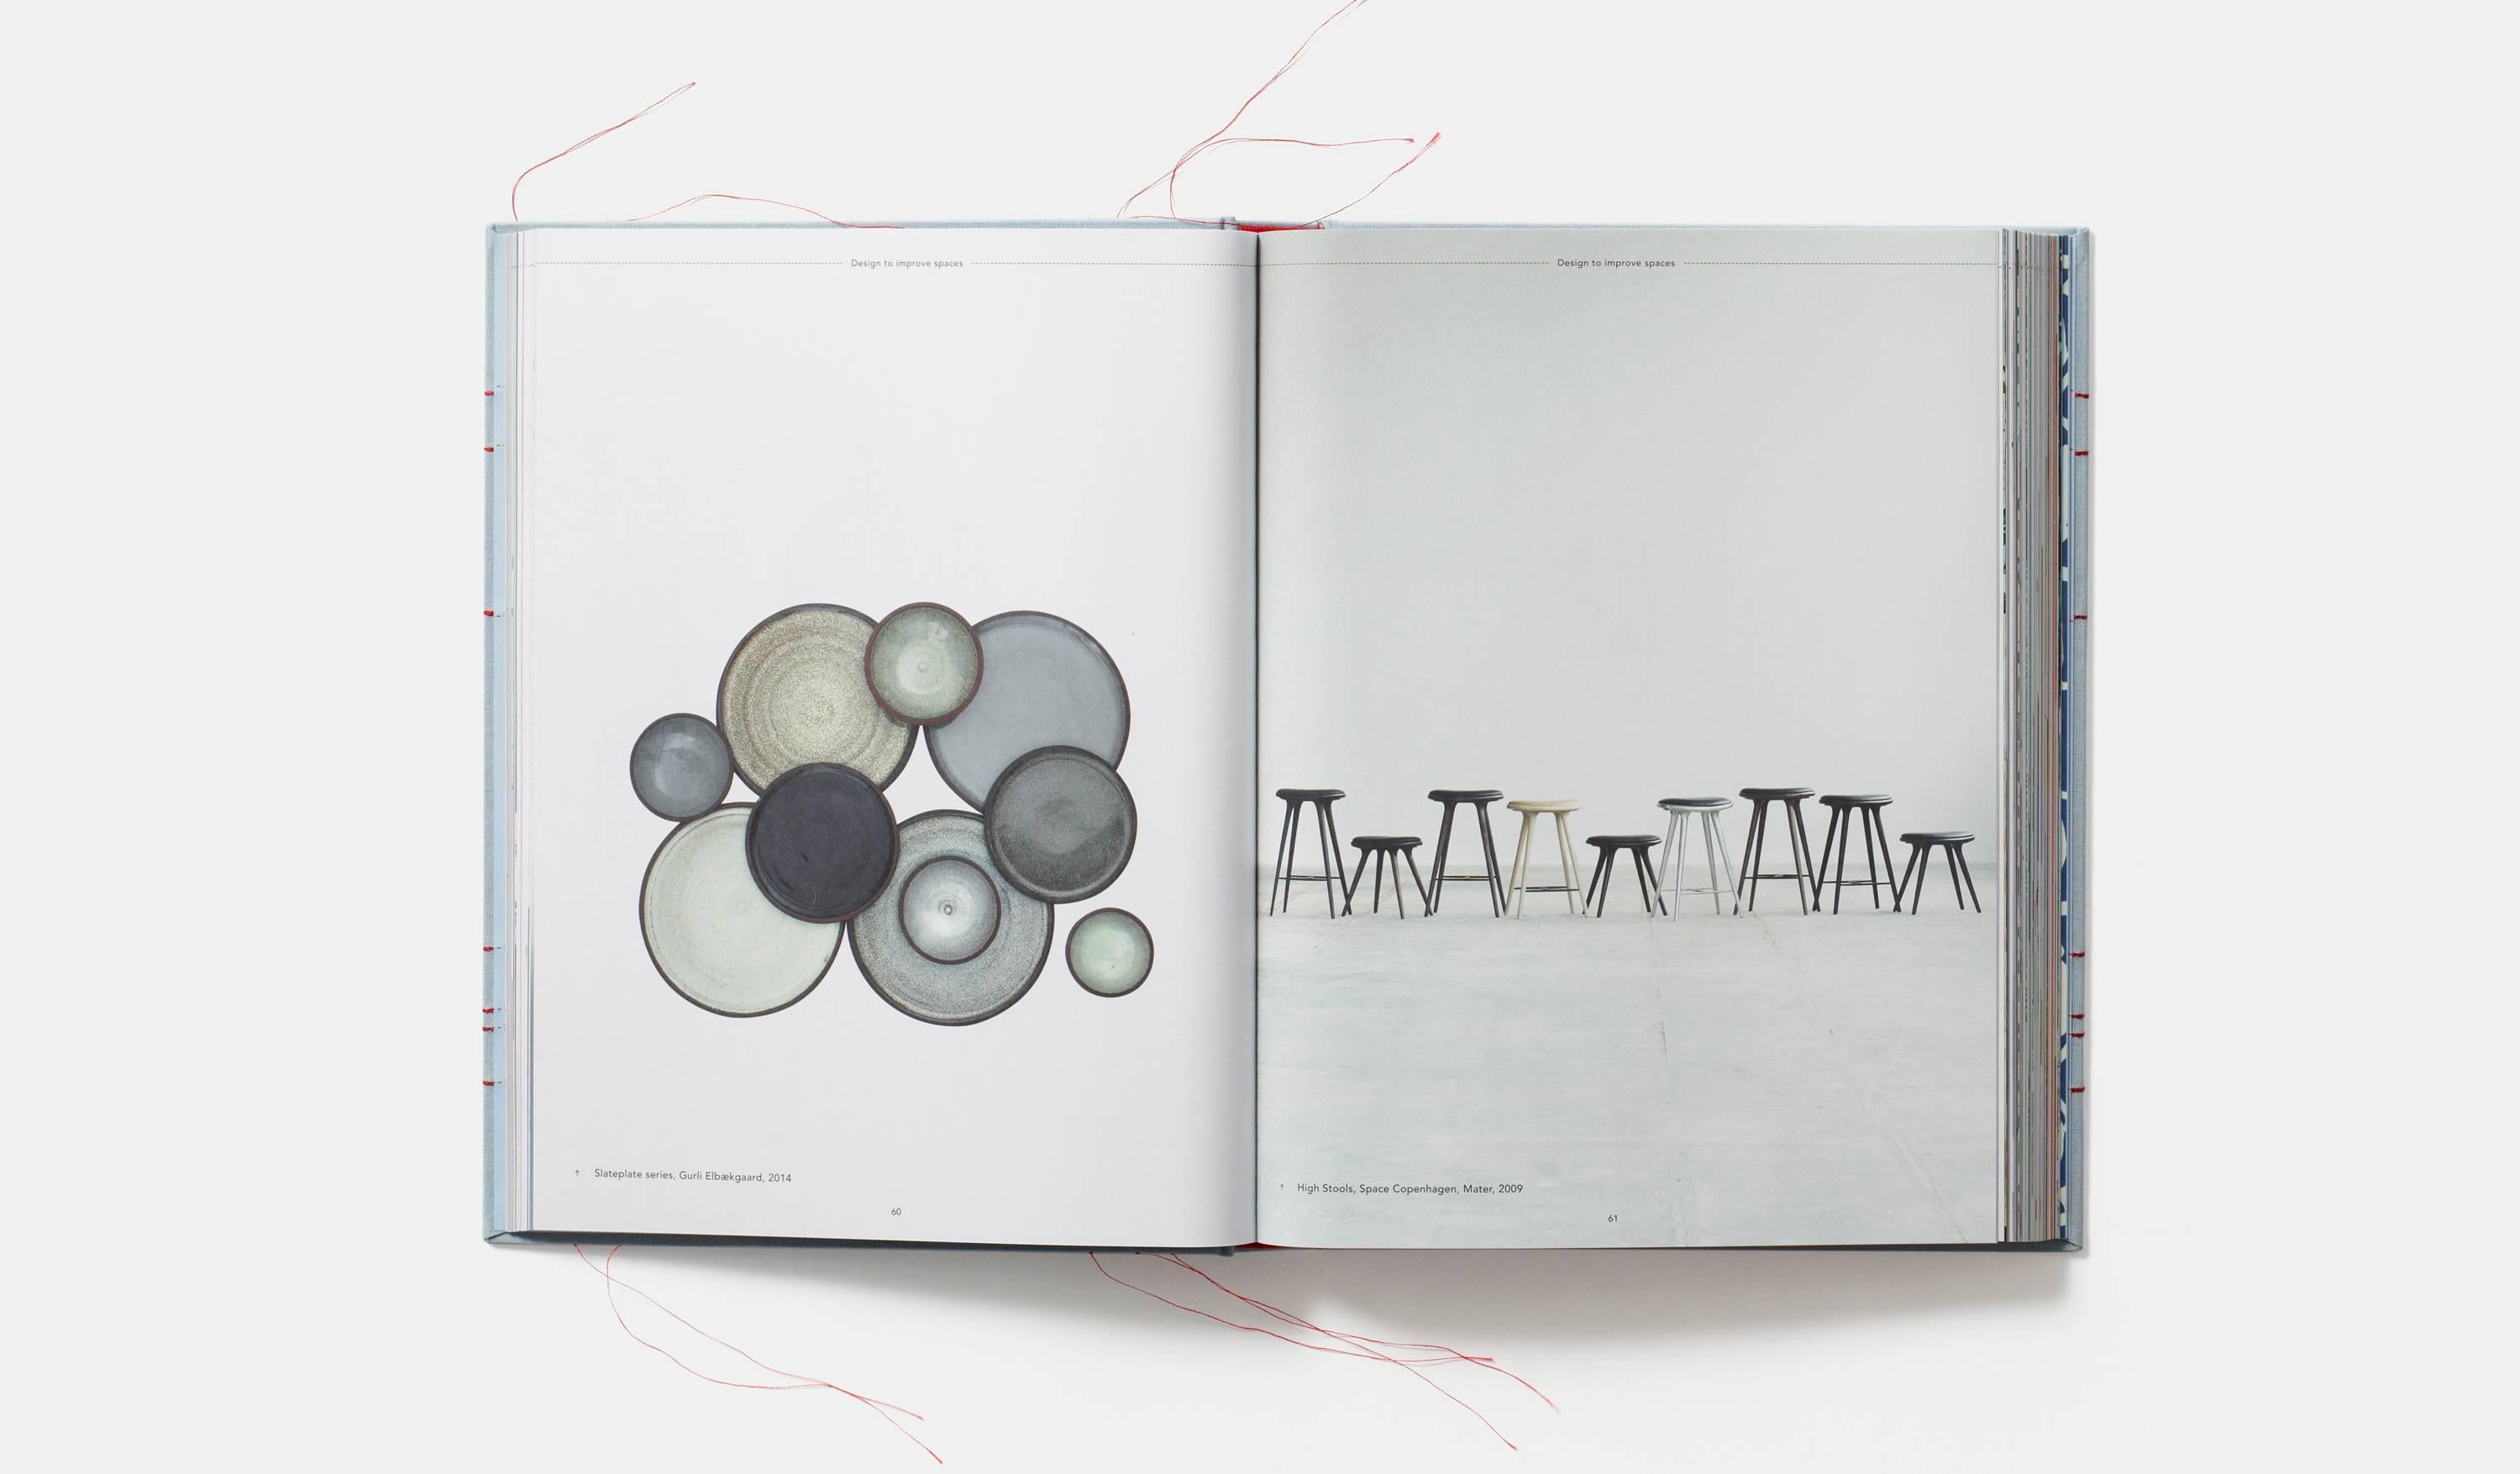 An elegant exploration of the hugely influential simplicity, beauty, and functionality of Nordic design timeless, yet on trend

From literature to food, lifestyle to fashion, cinema to architecture, Nordic influence is evident throughout